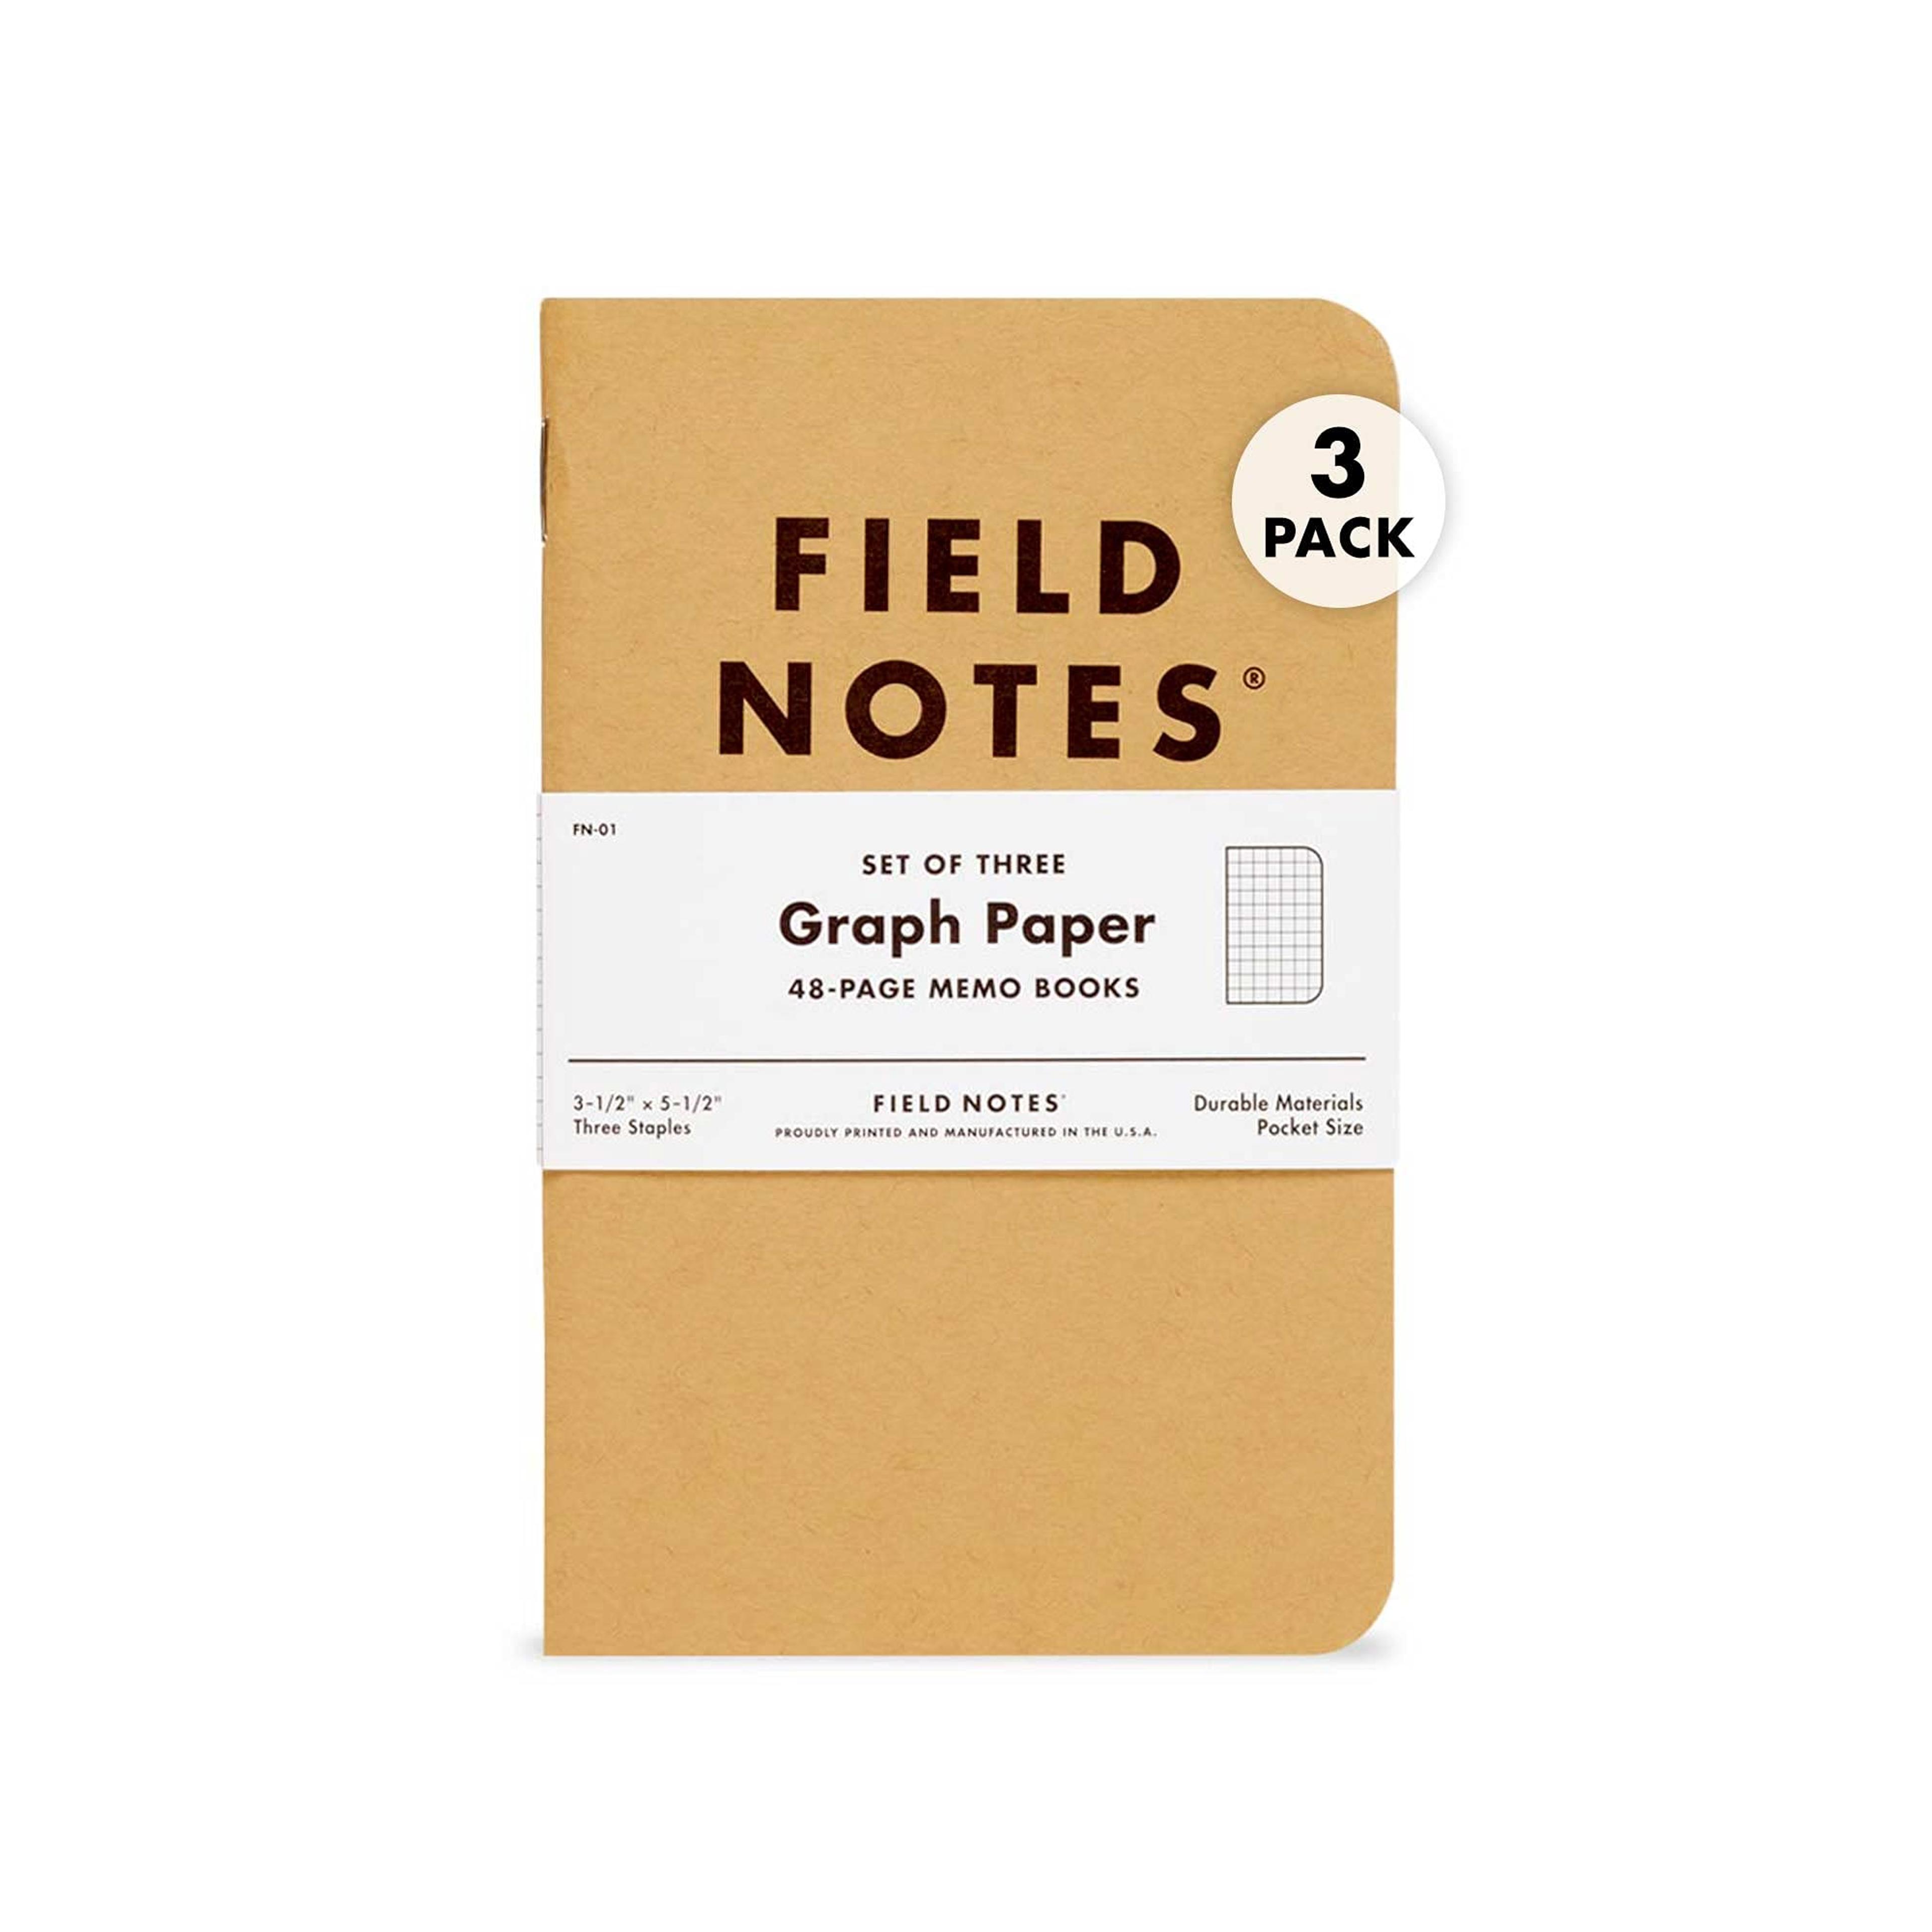 Amazon.com : Field Notes: Original Kraft 3-Pack - Graph Paper - 48 Pages - 3.5" x 5.5" : Wirebound Notebooks : Office Products